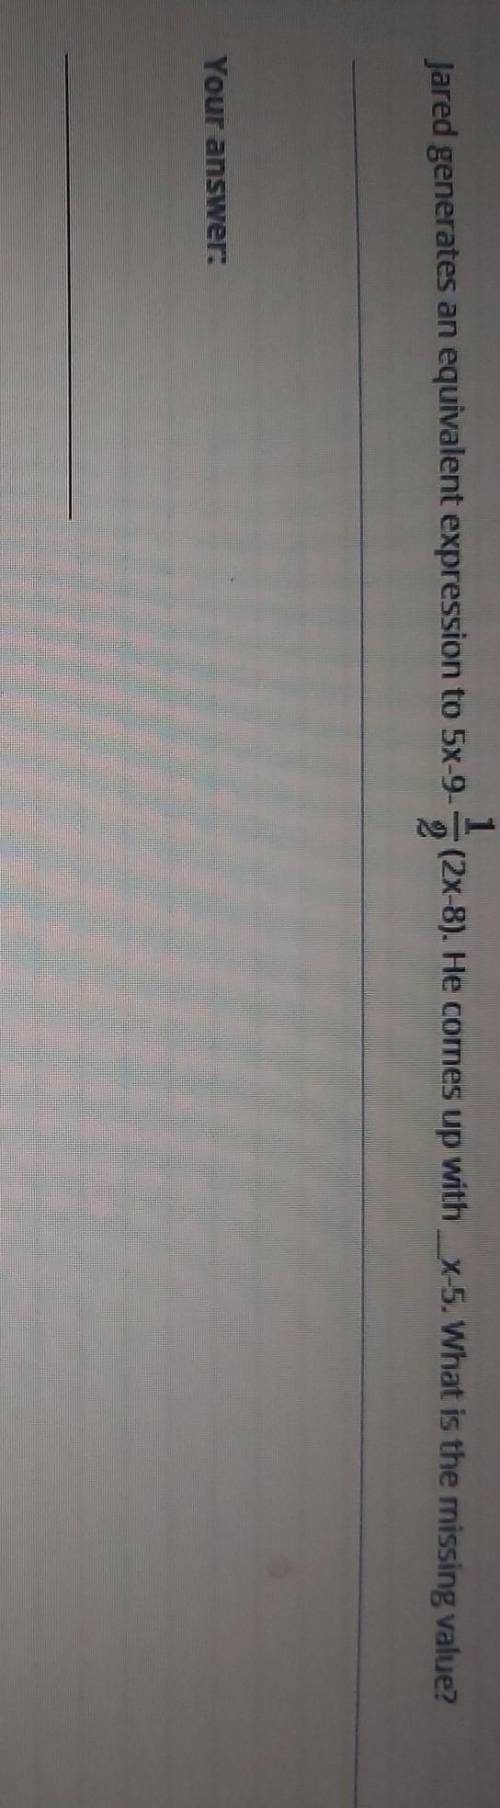 Help pls I have to type the answer